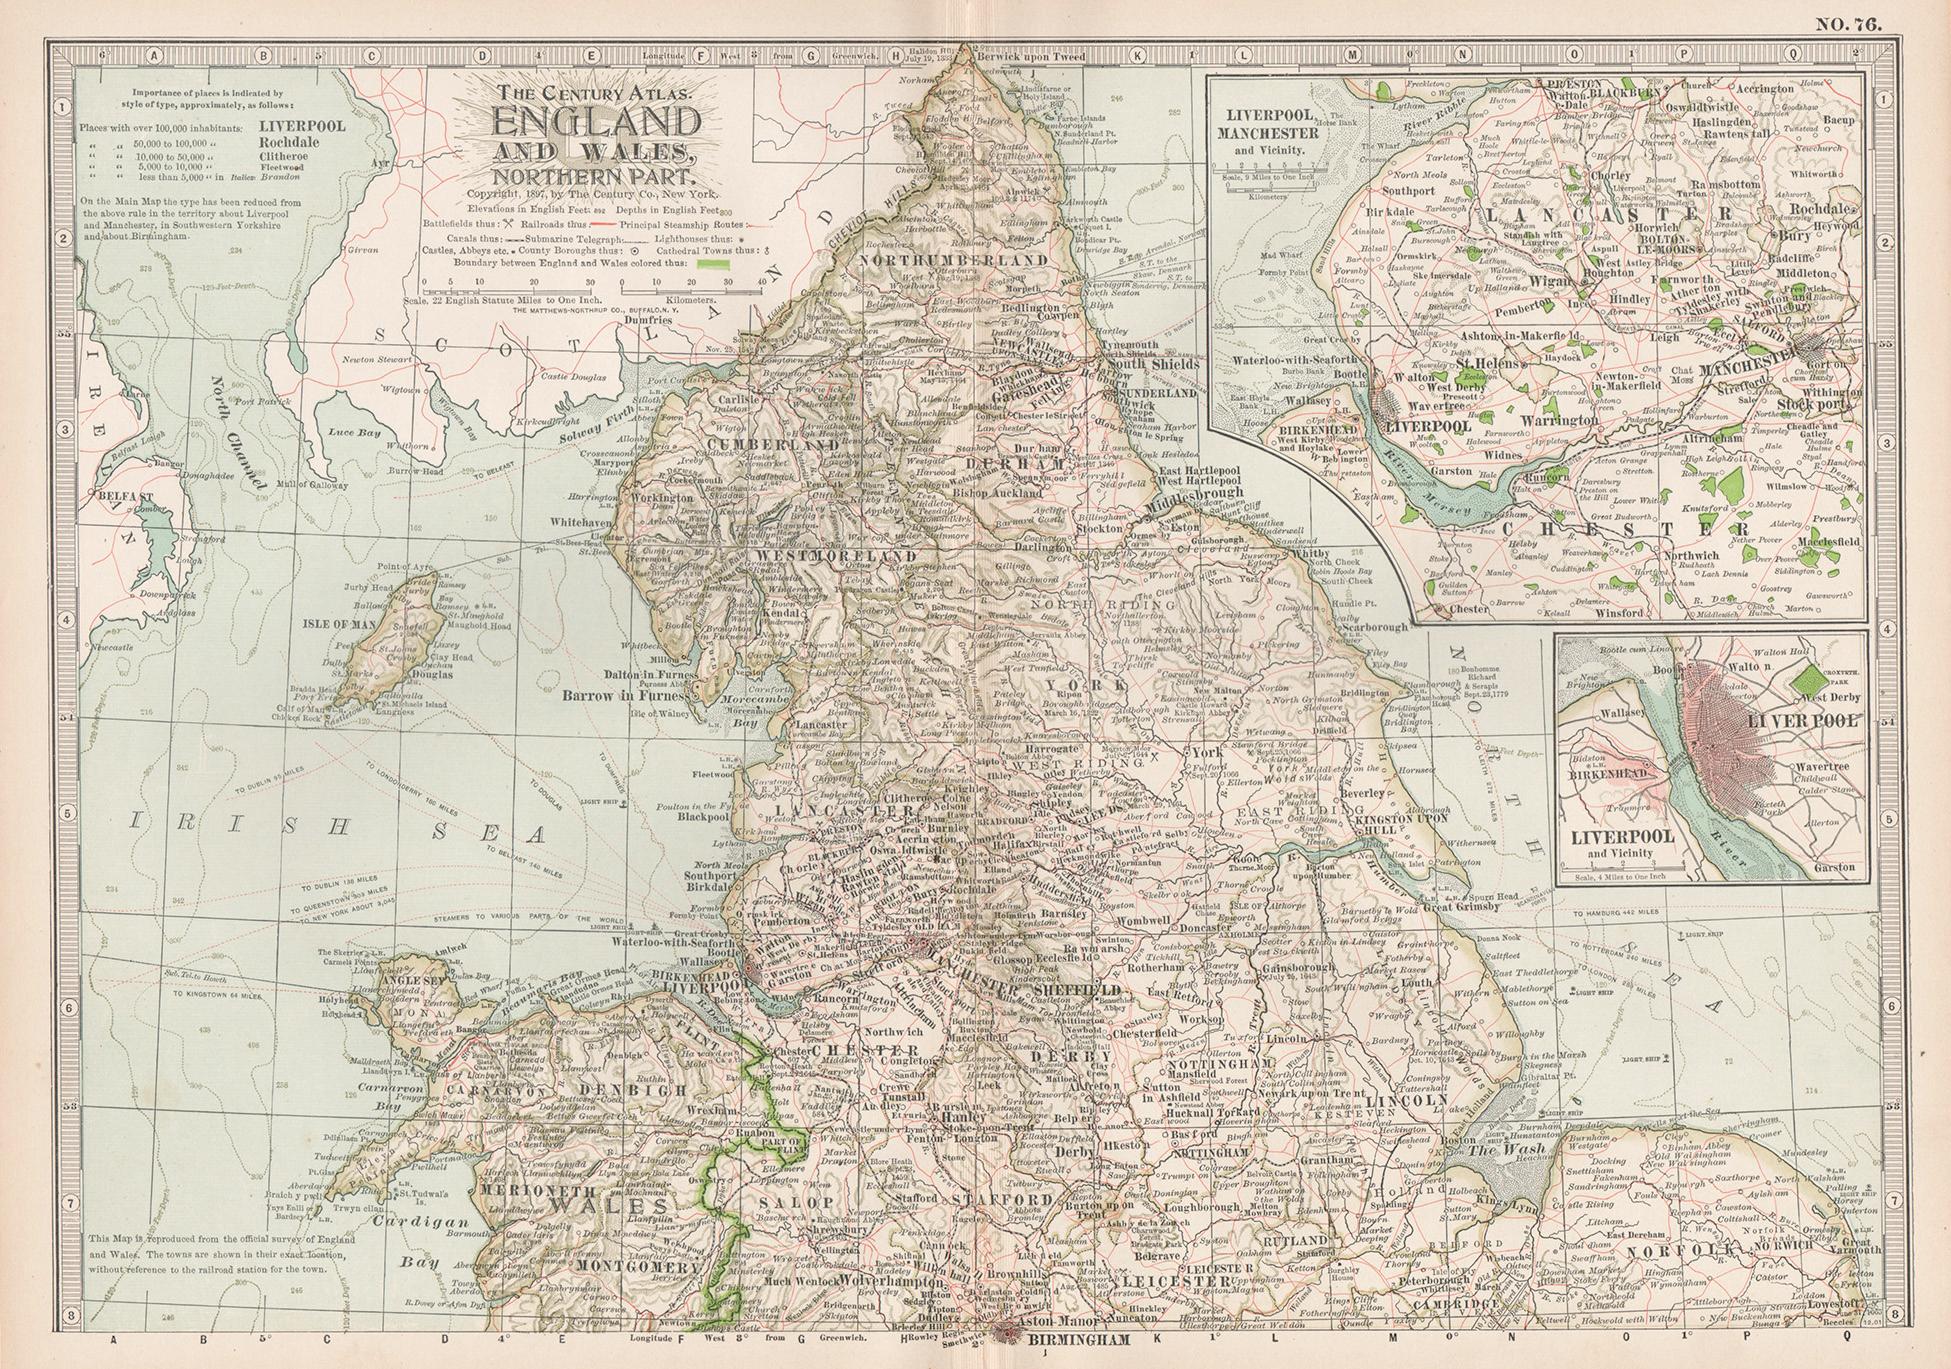 Unknown Print - England and Wales, Northern Part. Century Atlas antique vintage map